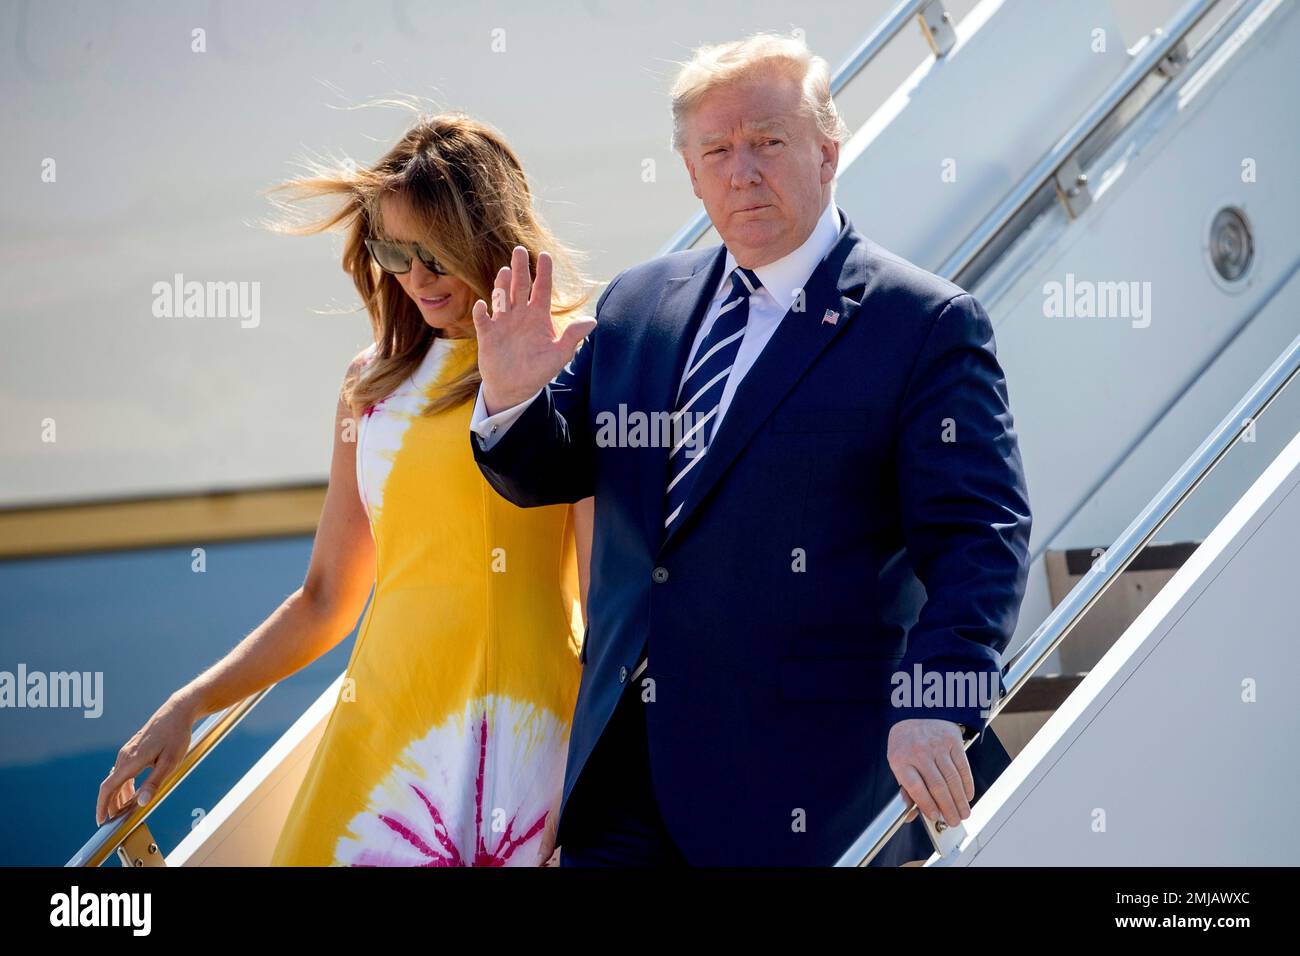 U.S President Donald Trump and first lady Melania Trump arrive in Biarritz,  France, Saturday, Aug. 24, 2019, for the G-7 summit. World leaders and  protesters are converging on the southern French resort